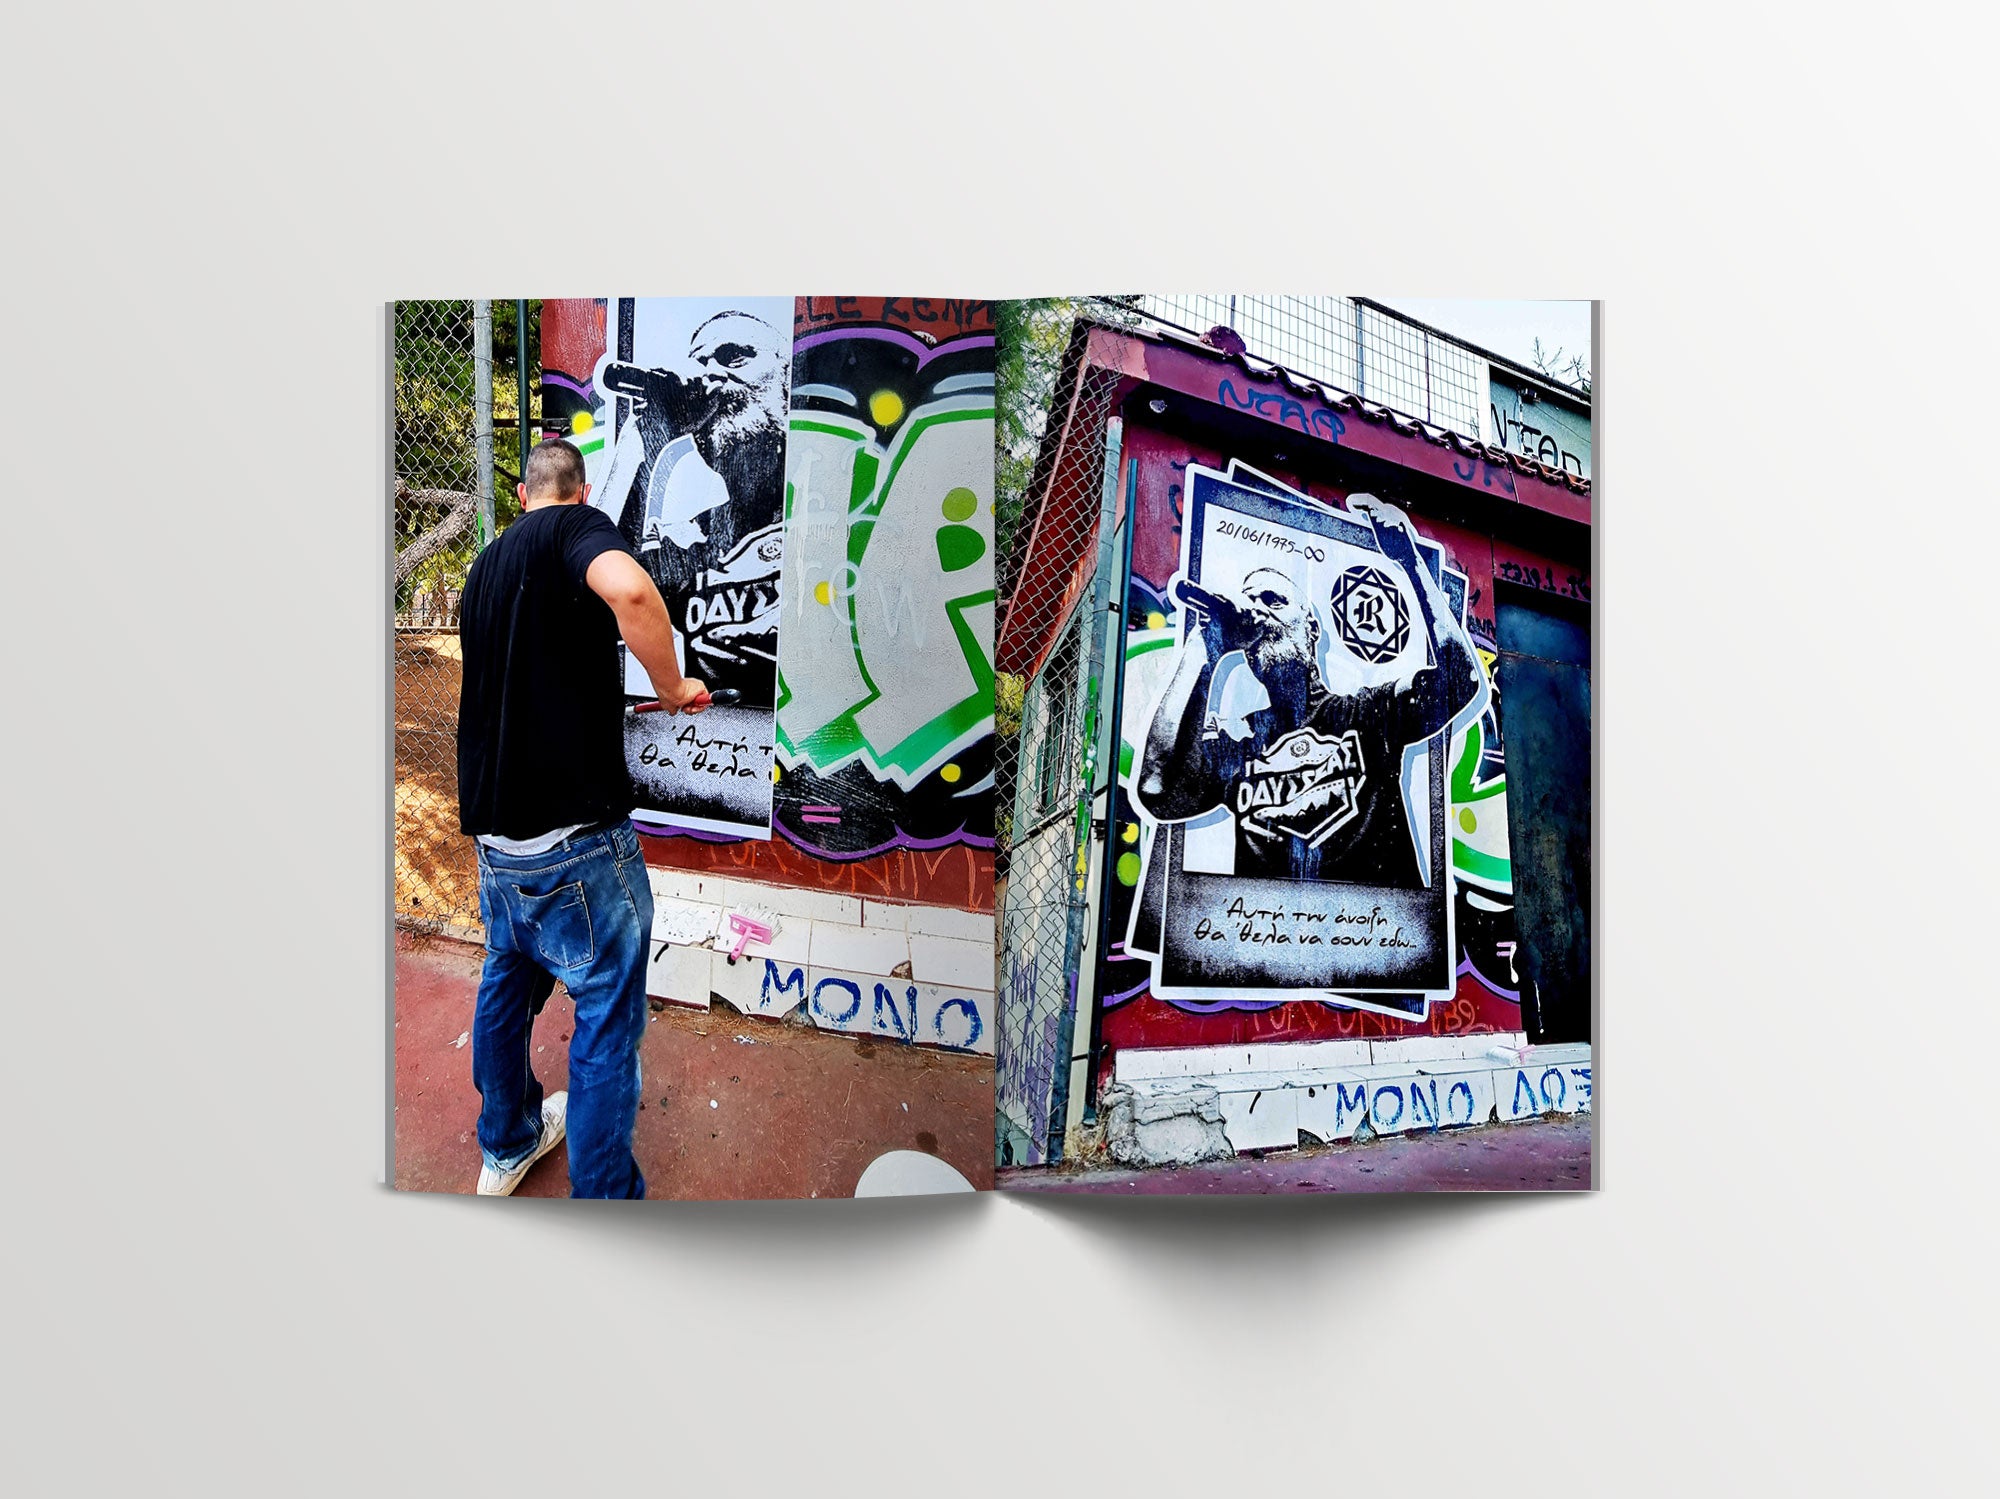 No Signal - Pro Heroes 015. Behind the scenes of a street artist from Greece